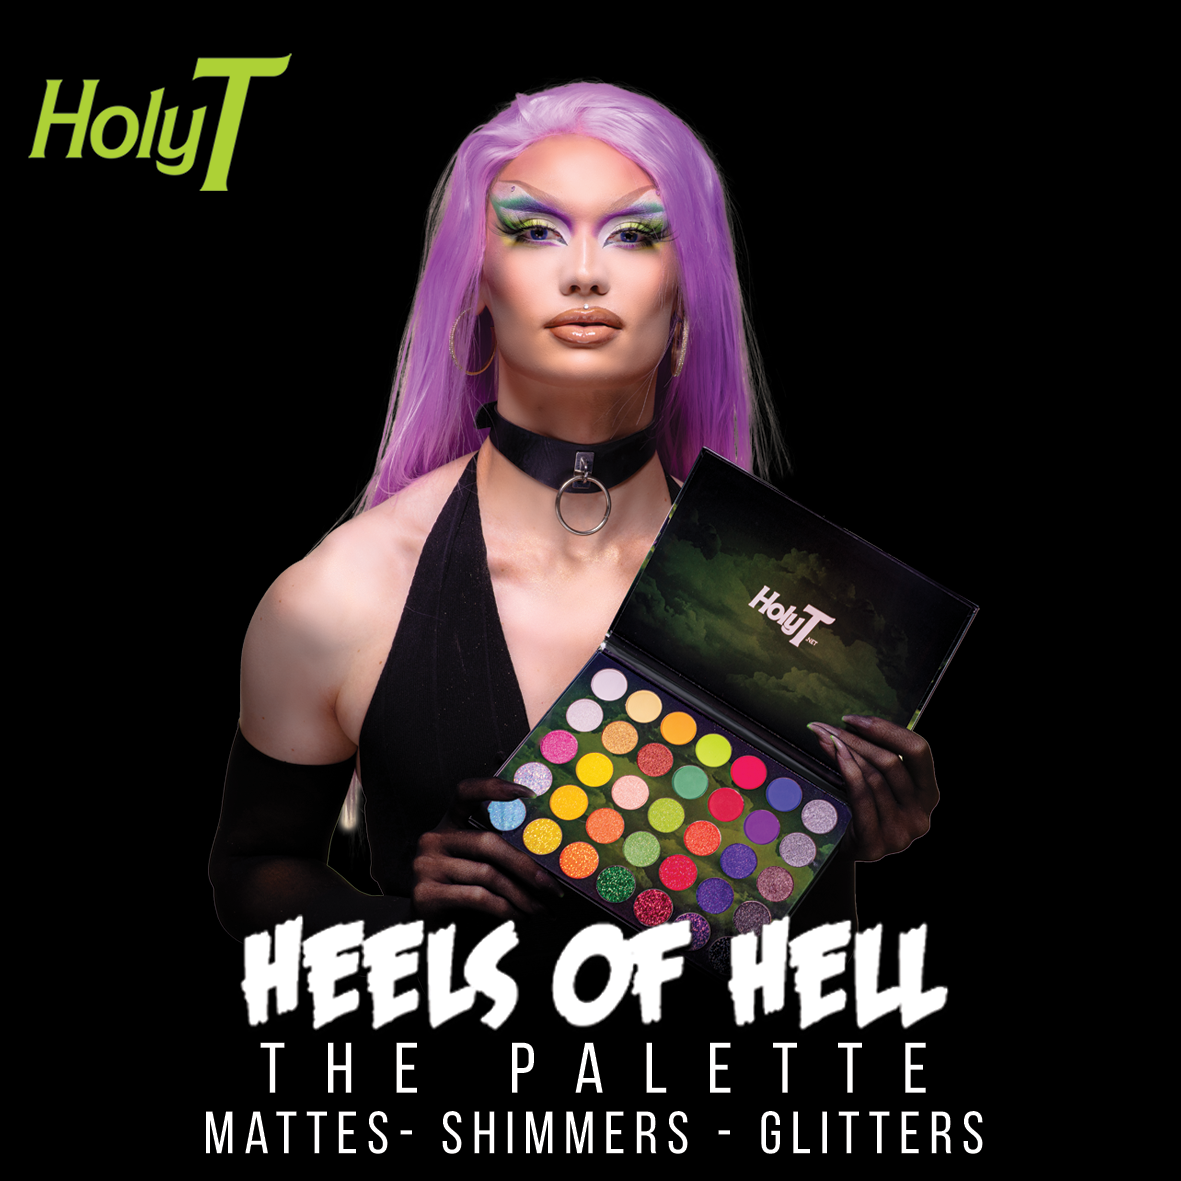 Heels of Hell: The Palette